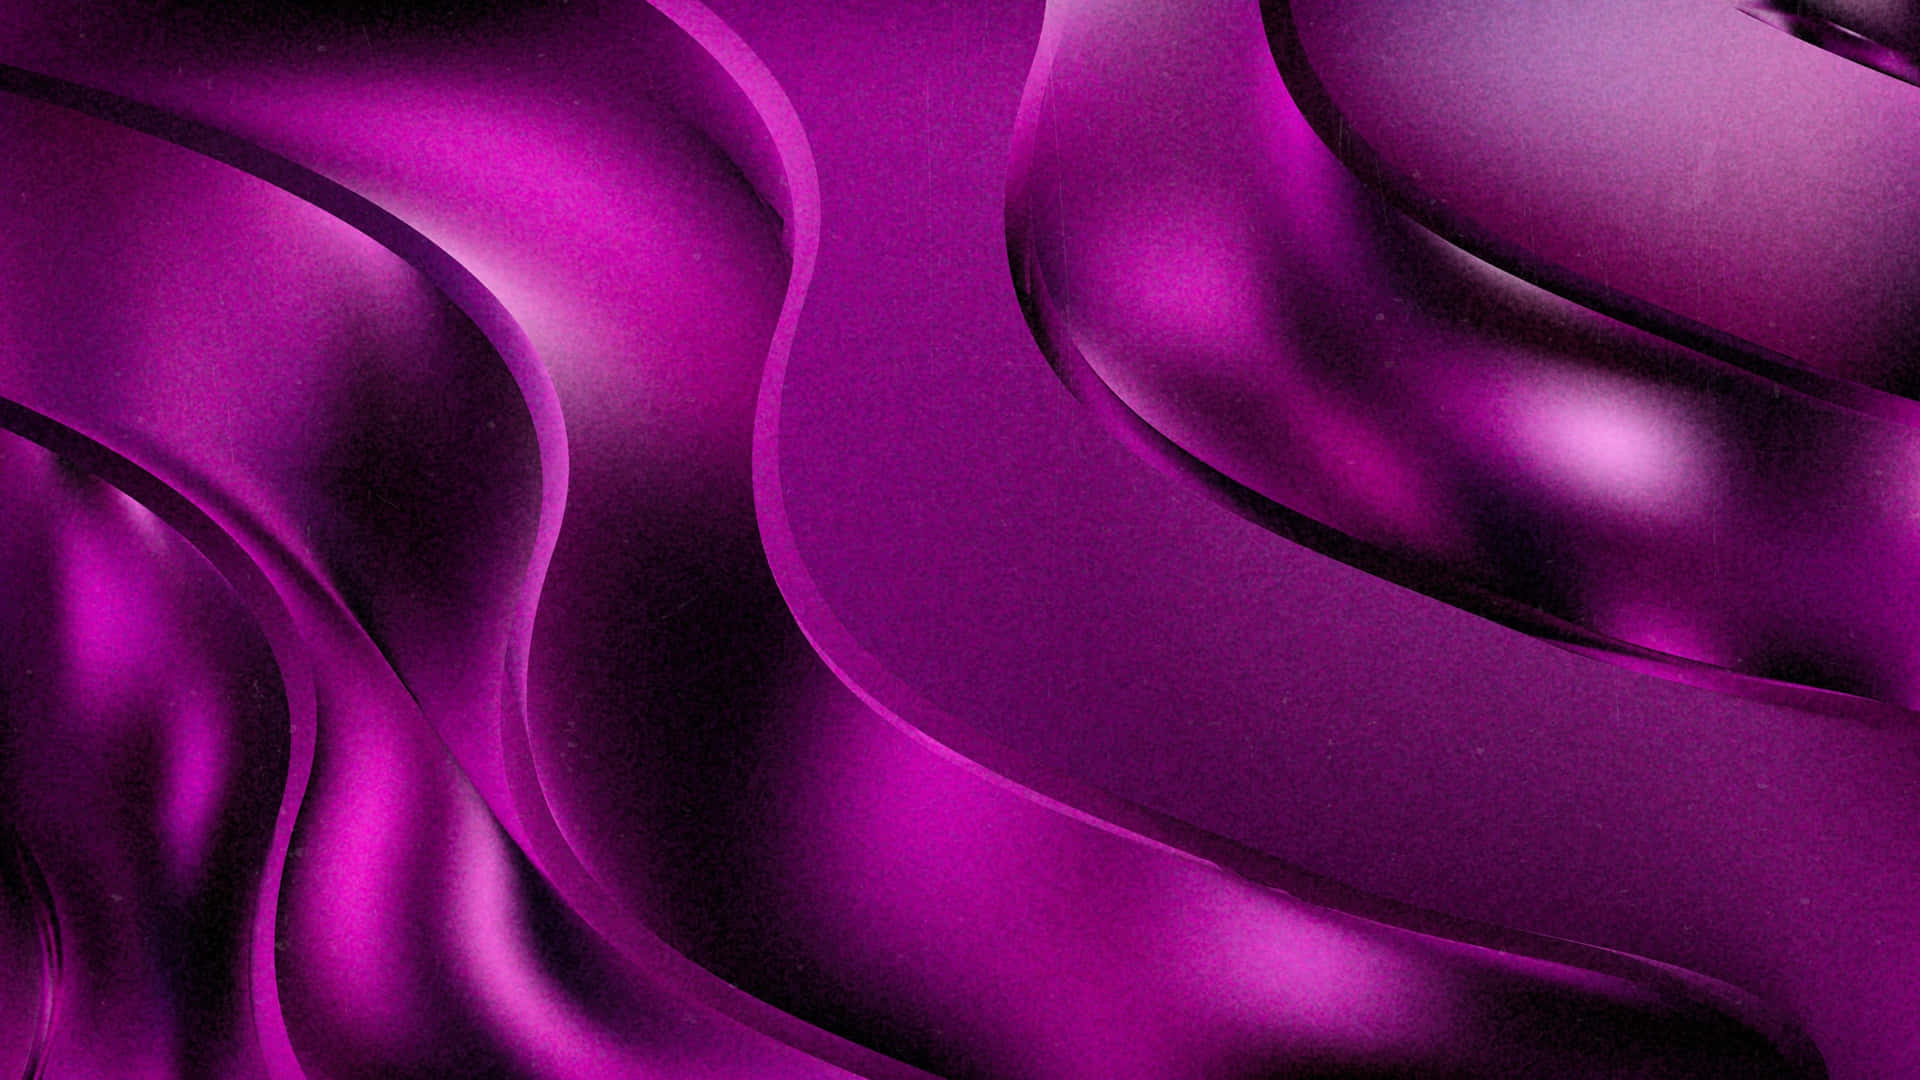 Feel exceptional and look extraordinary in this blend of vibrant and bold Purple Satin. Wallpaper